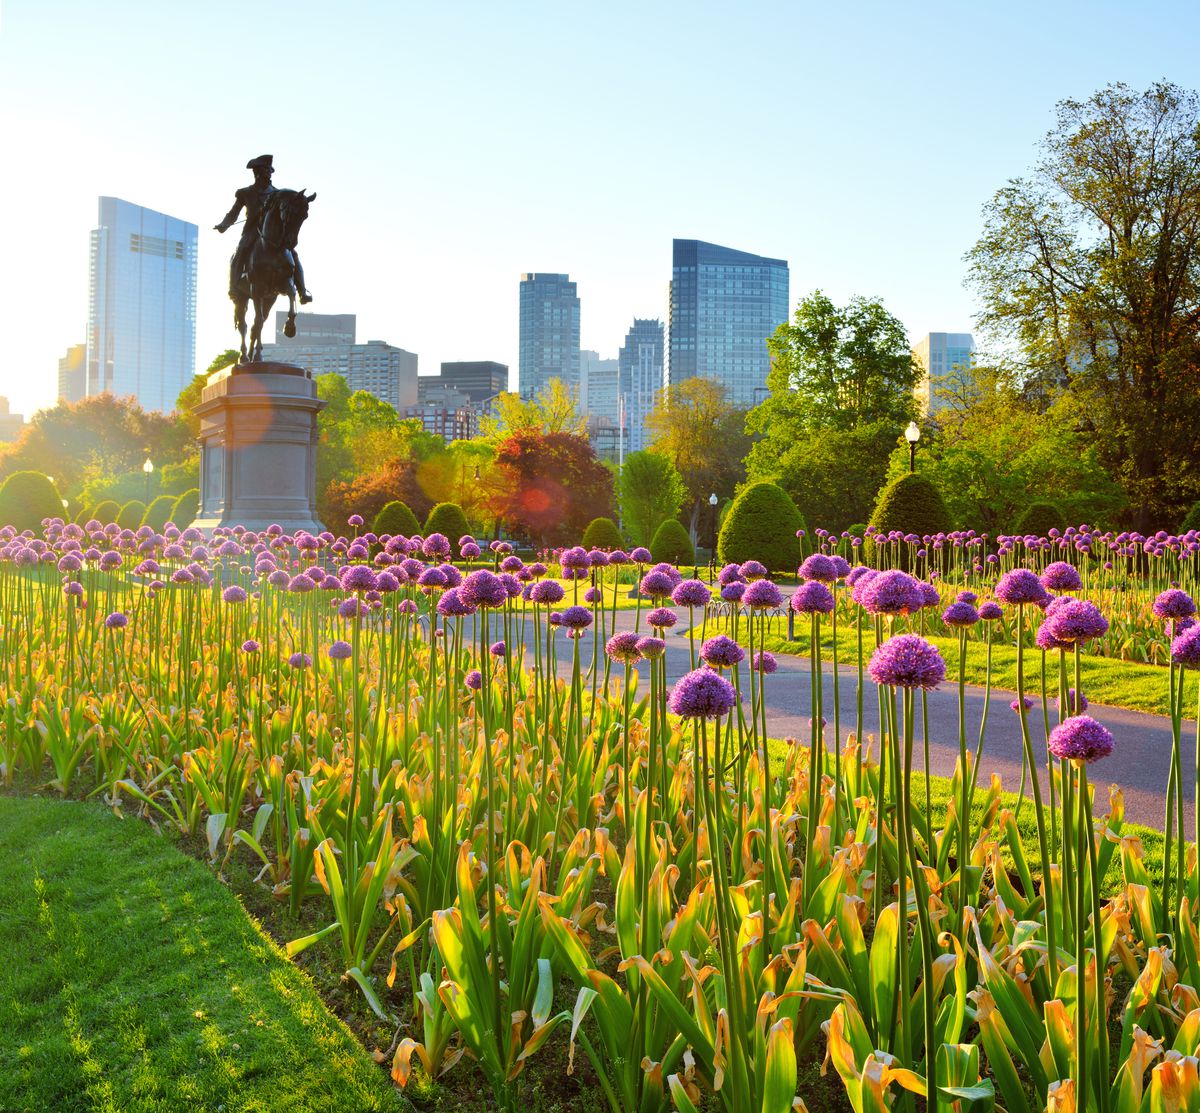 A tall statue of a man on a horse amid purple flowers in downtown Boston. In the distance is a city skyline with many tall buildings. 